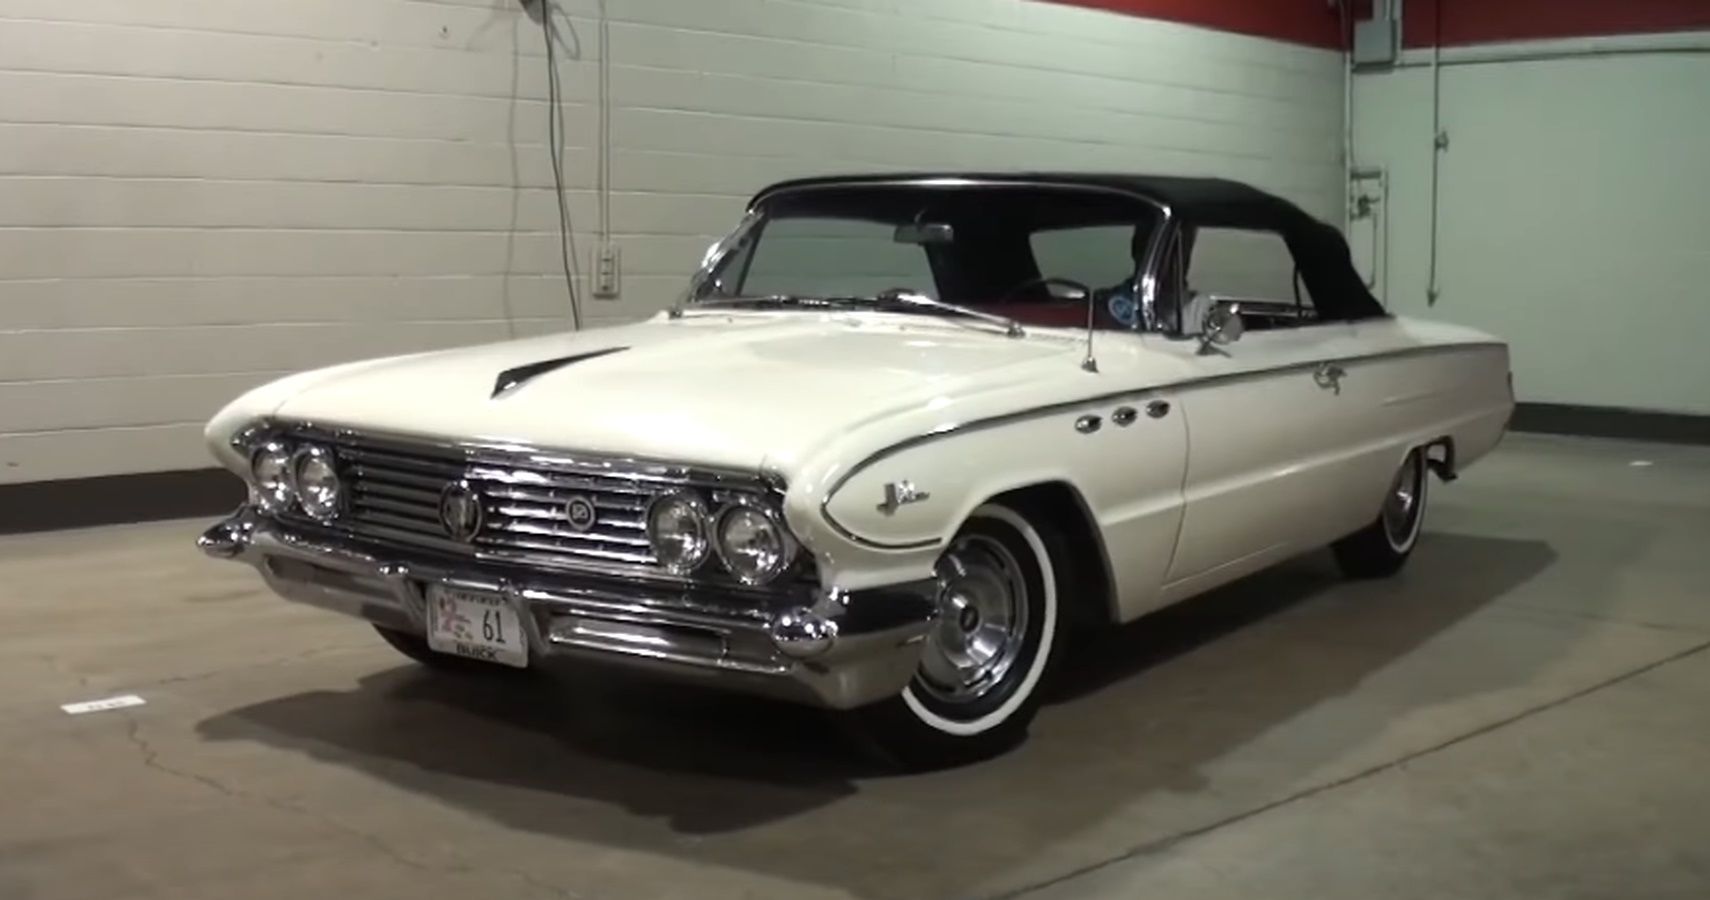 Front and side view of a white 1961 Buick LeSabre convertible with the top up